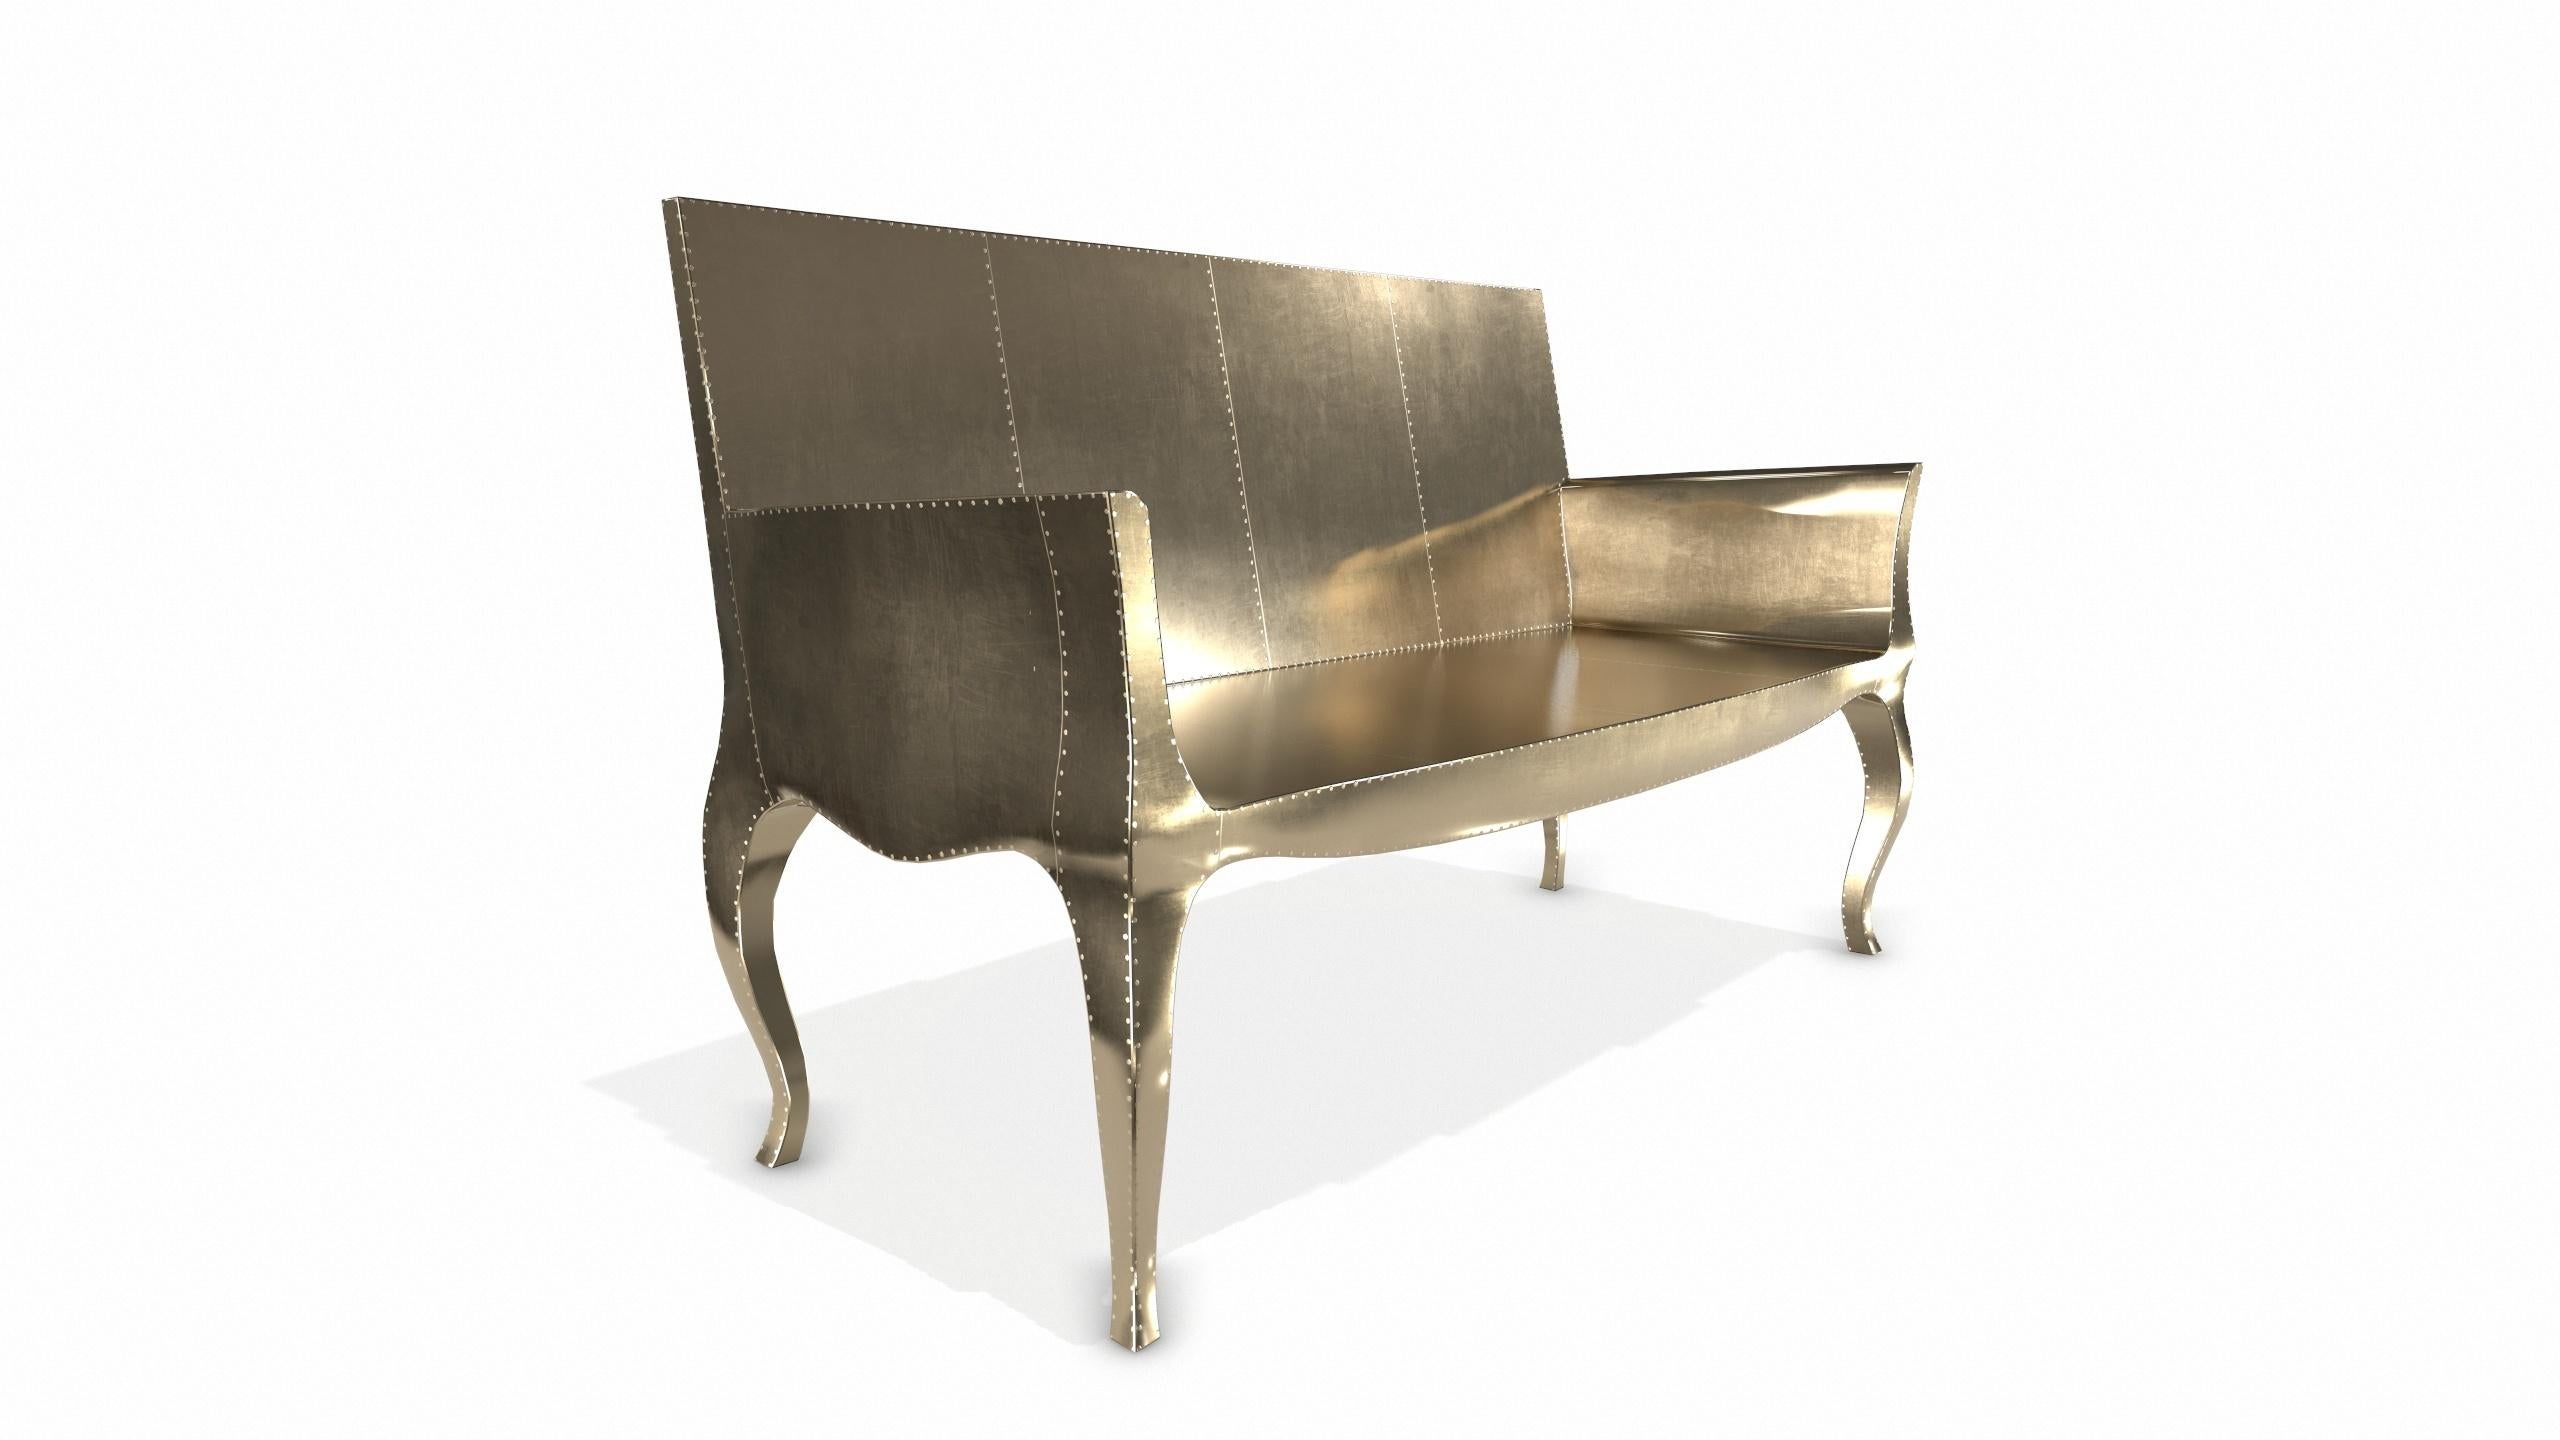 Louise Settee Art Deco Daybeds in Smooth Brass by Paul Mathieu for S Odegard In New Condition For Sale In New York, NY